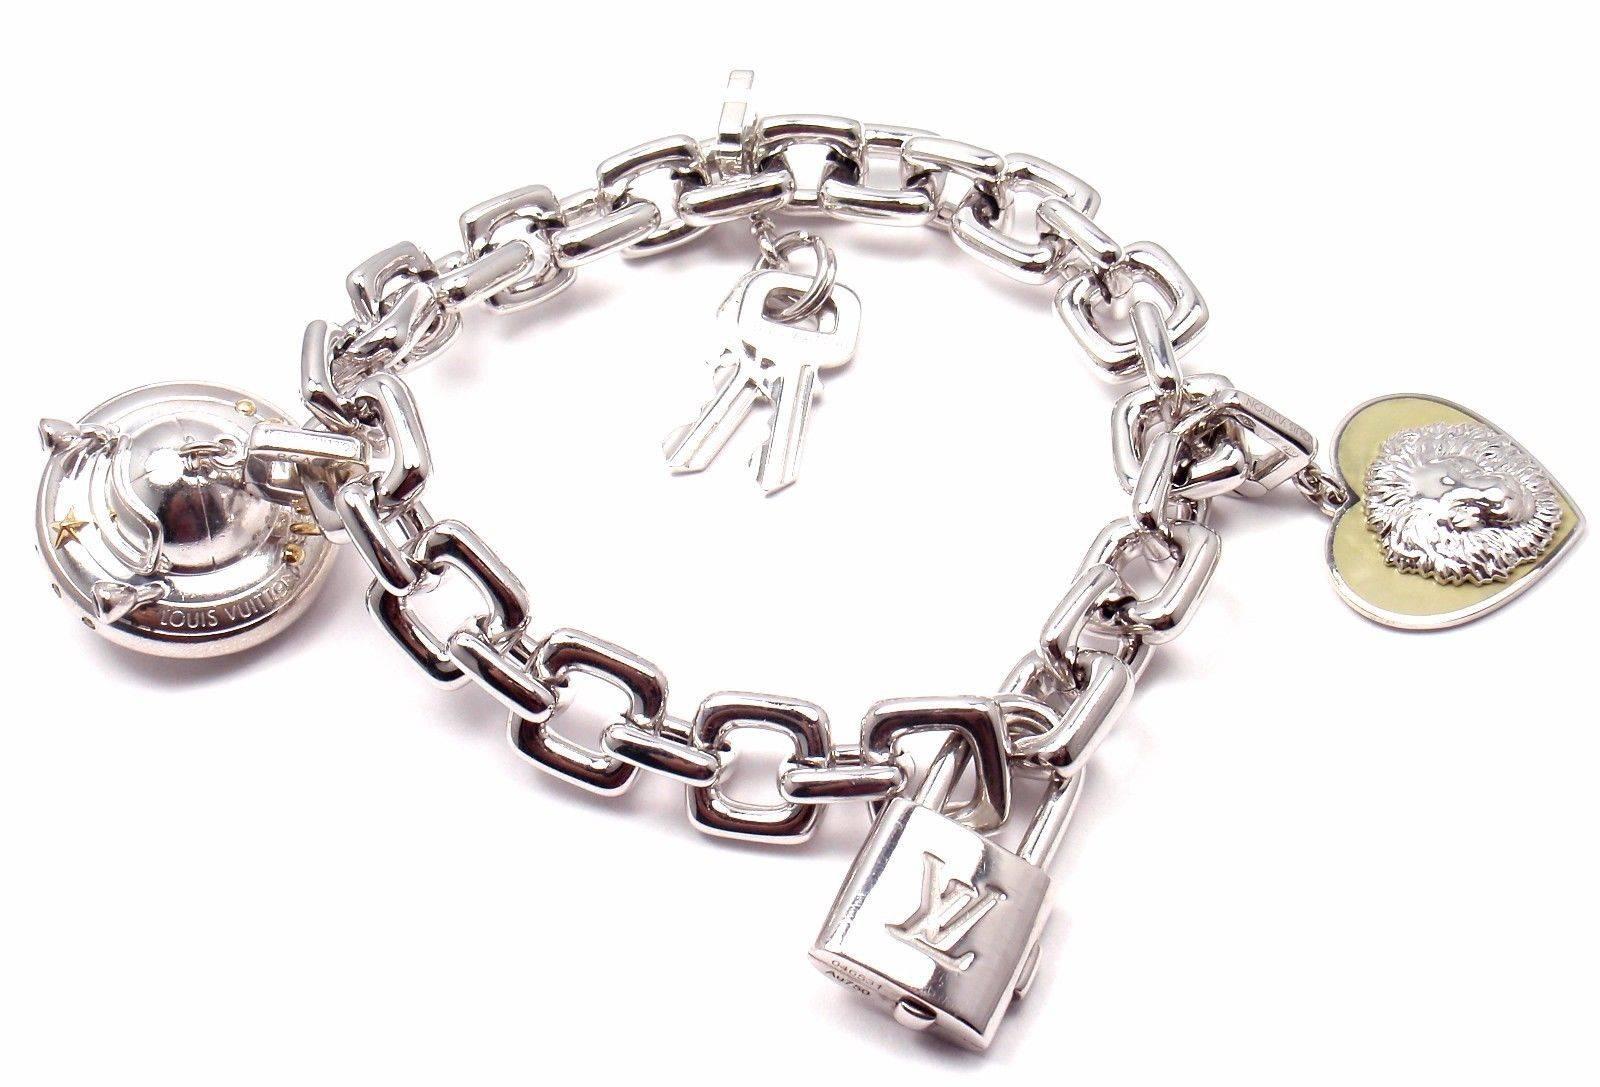 18k White Gold Charm Large Link Bracelet With Charms By Louis Vuitton.
This bracelet comes with three charms: key charm, UFO charm and Be well Lion charm.
With 1 blue sapphire and 2 pink sapphires.

Details:
Length: 8